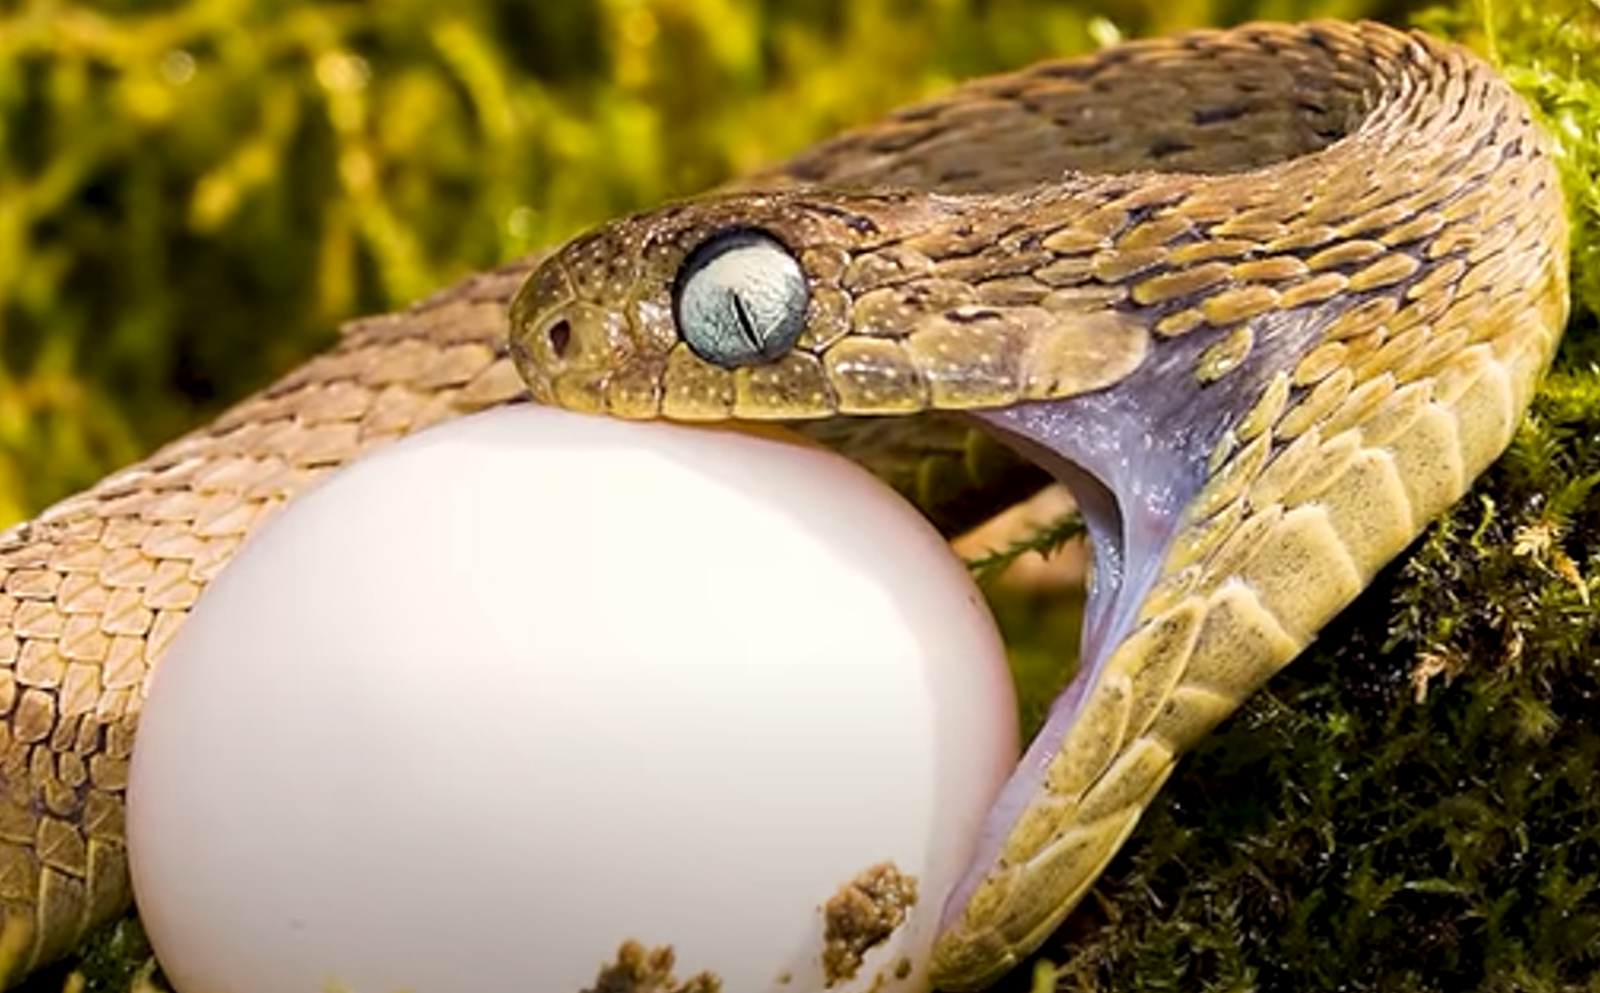 African egg eating snake with egg in mouth